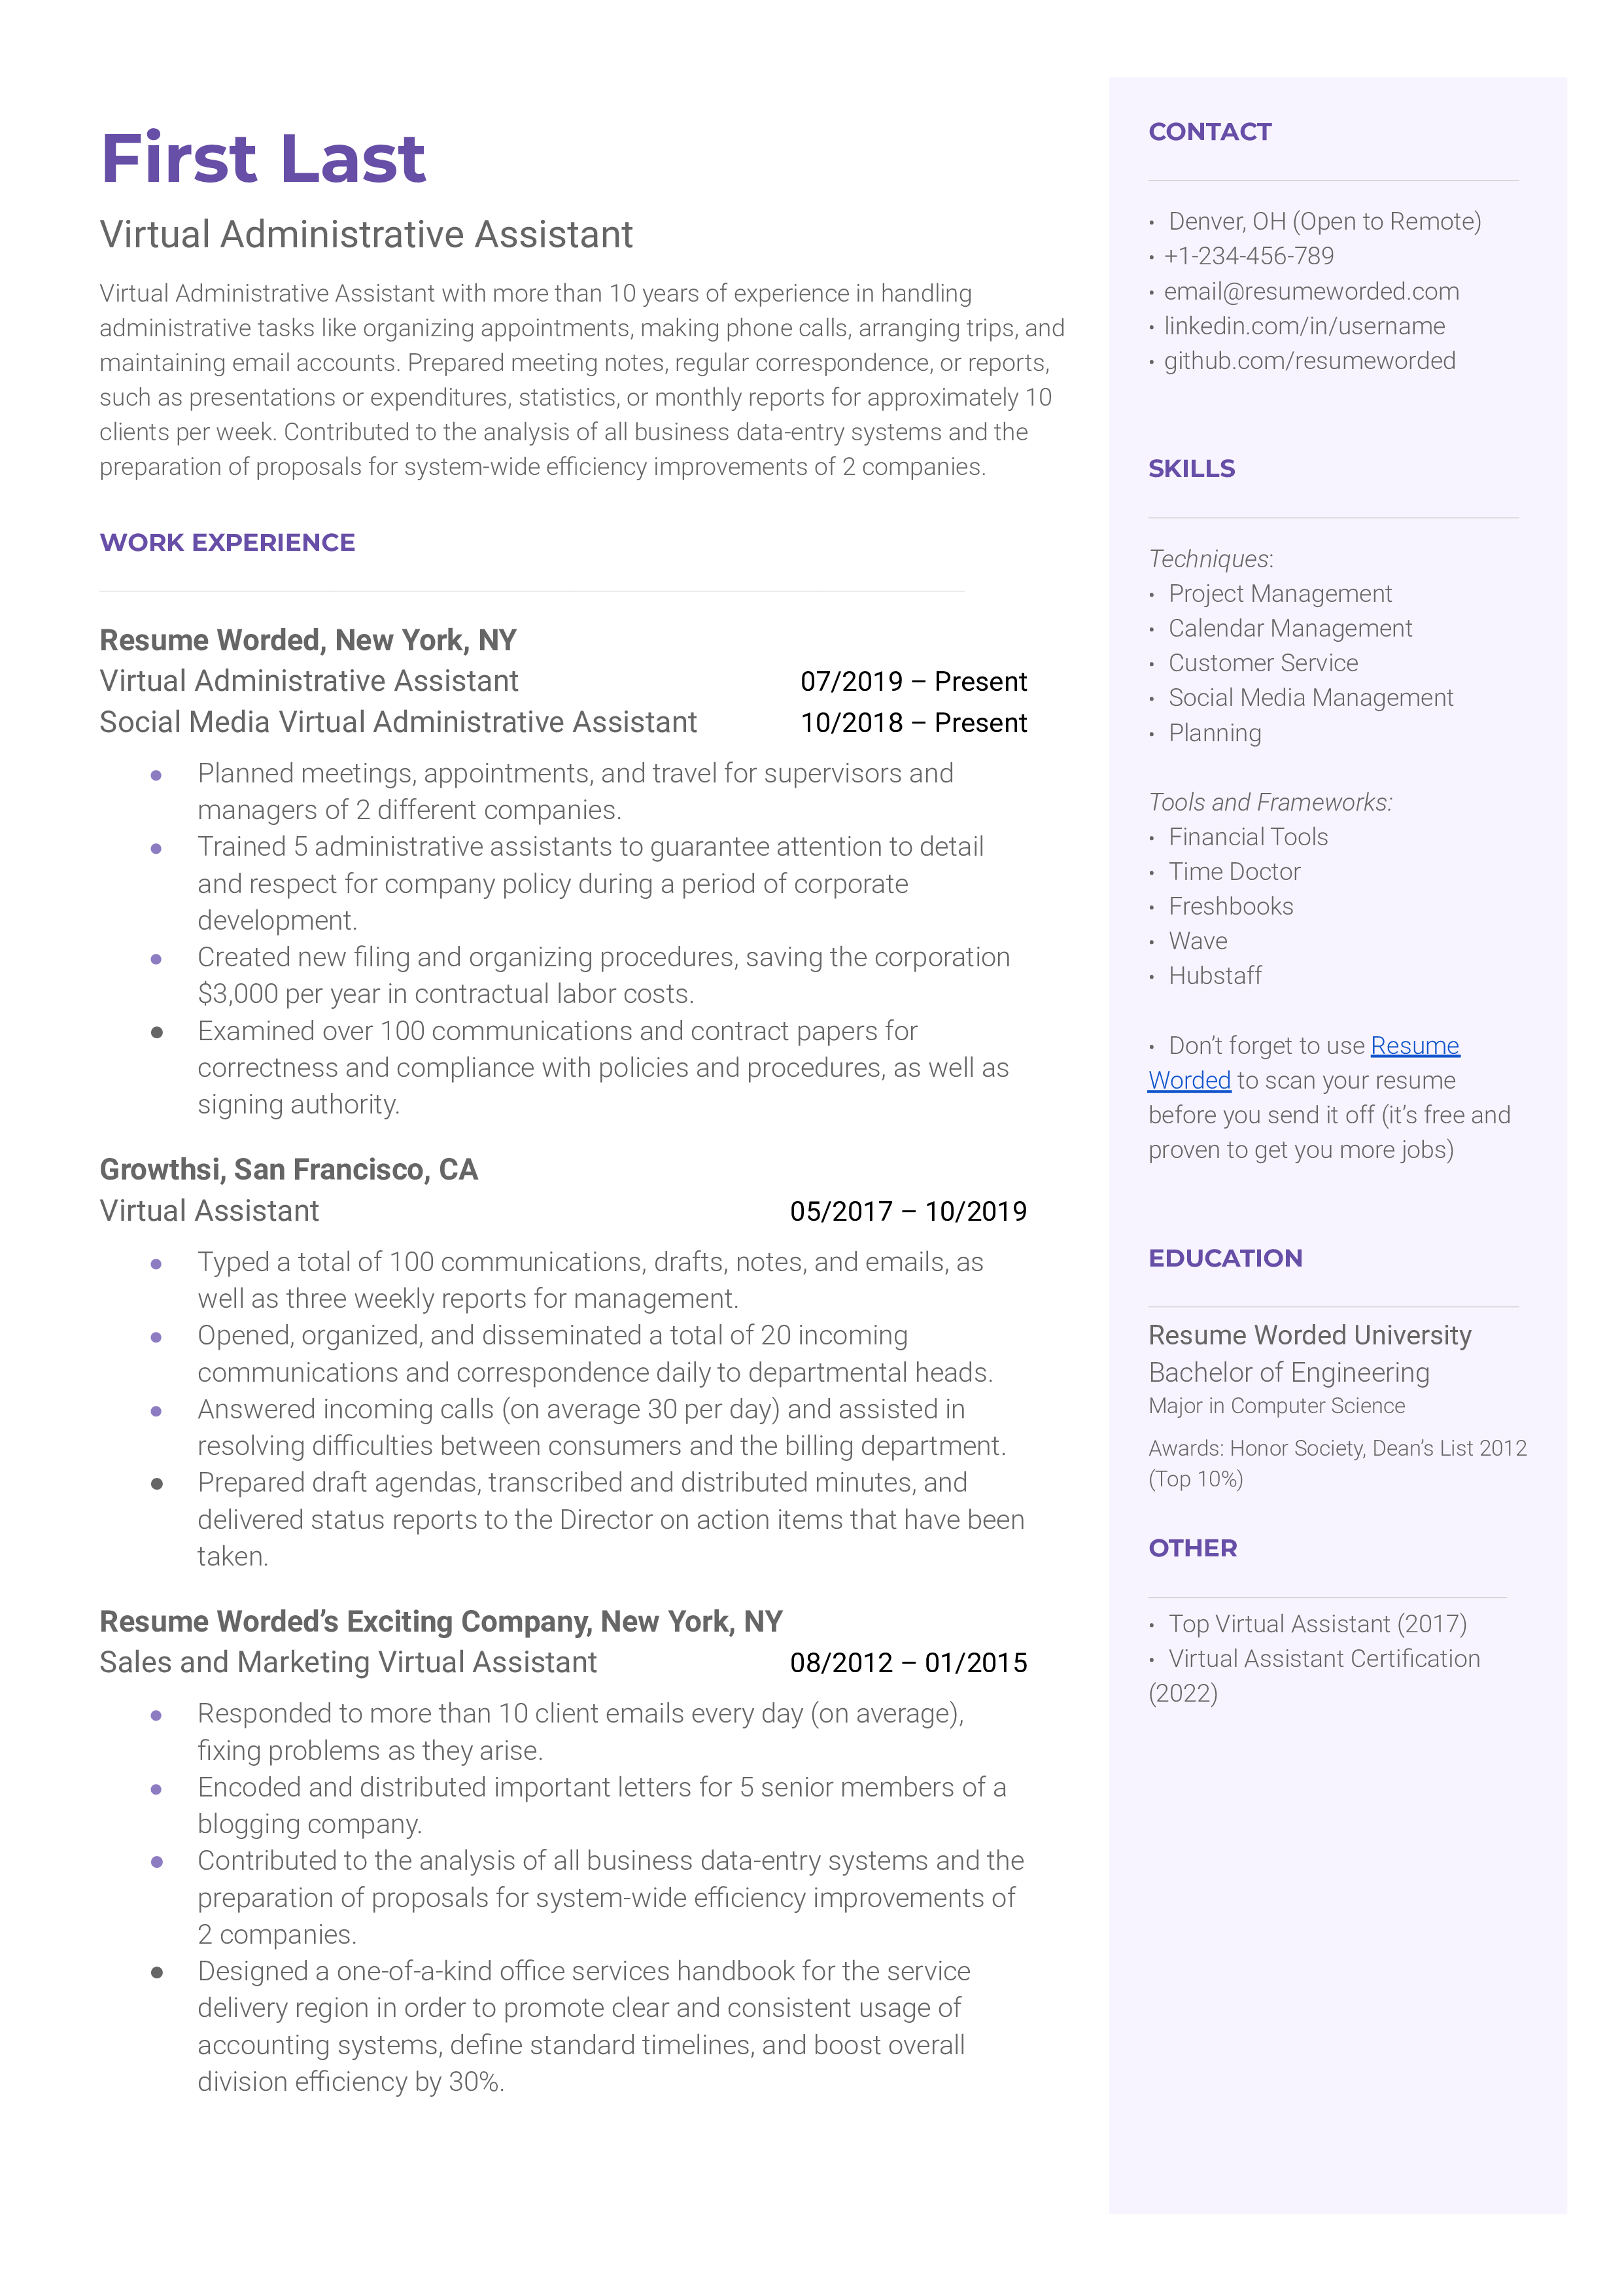 A well-structured CV for a Virtual Administrative Assistant job application.